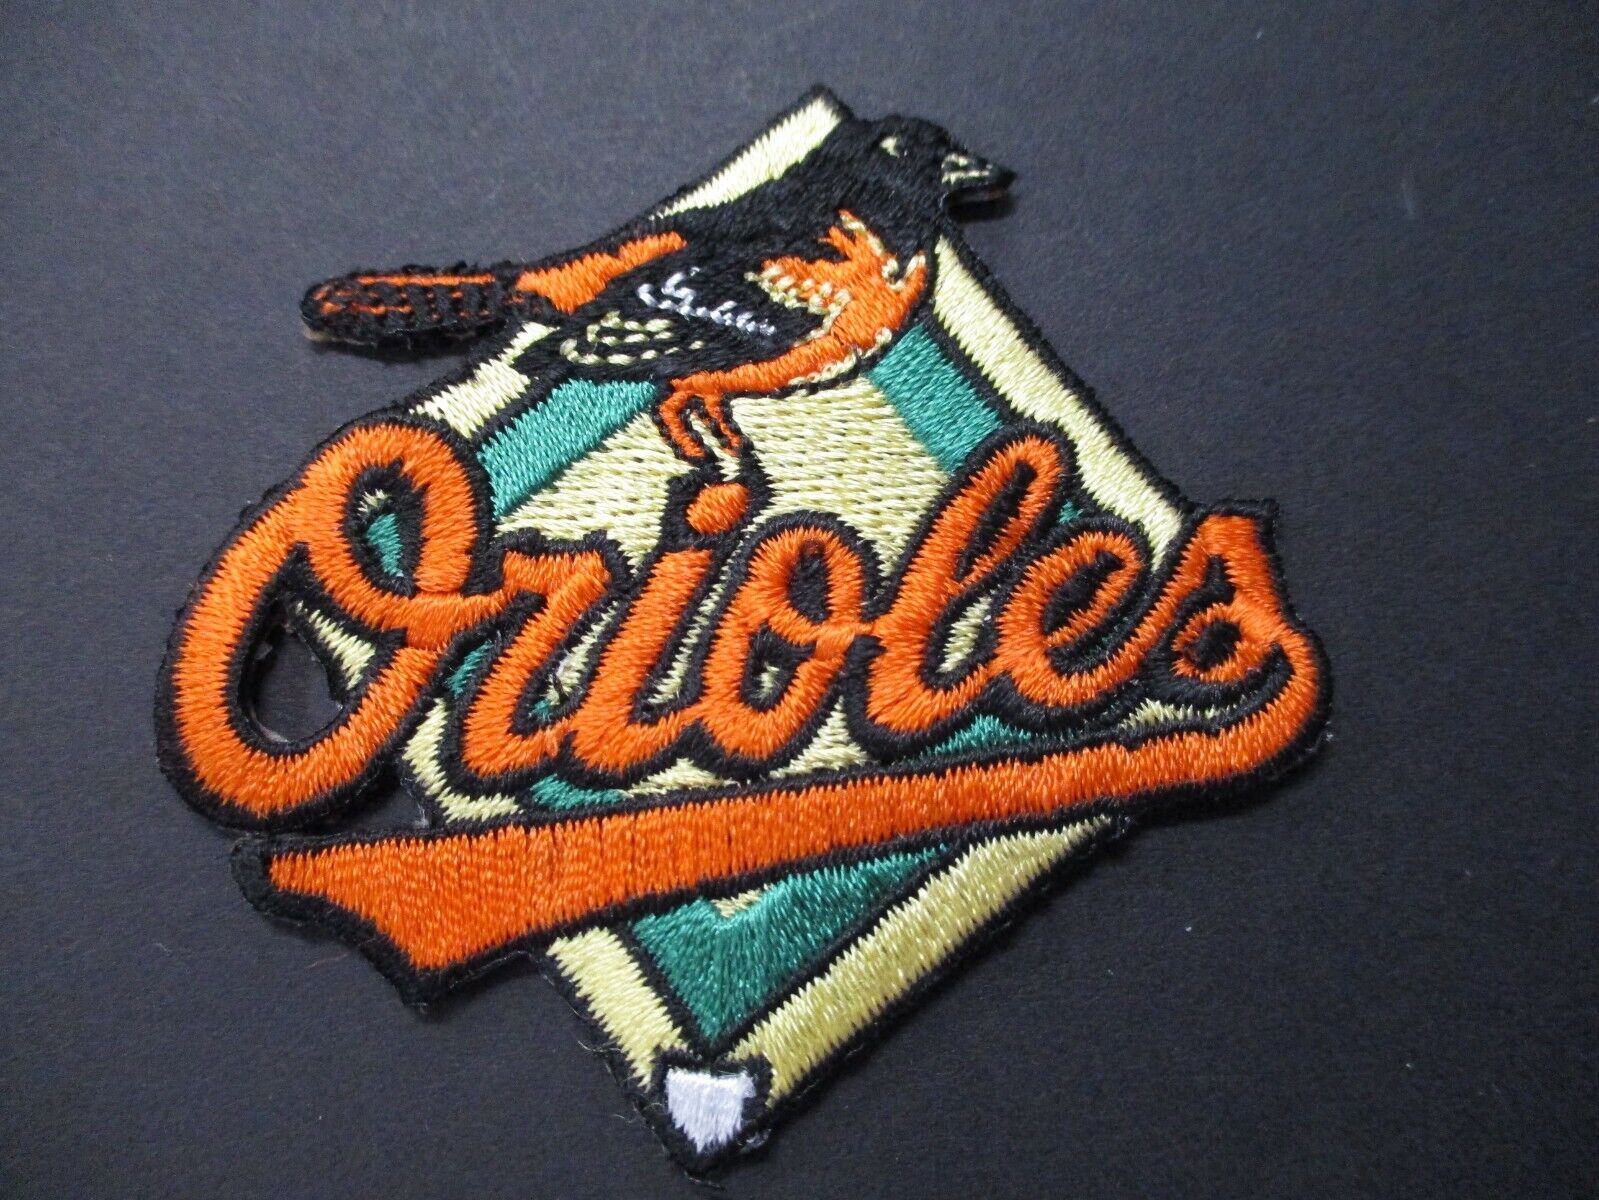 Baltimore Orioles Plaque Diamond MLB Baseball Patch Size 2.5 x 2.5 inches